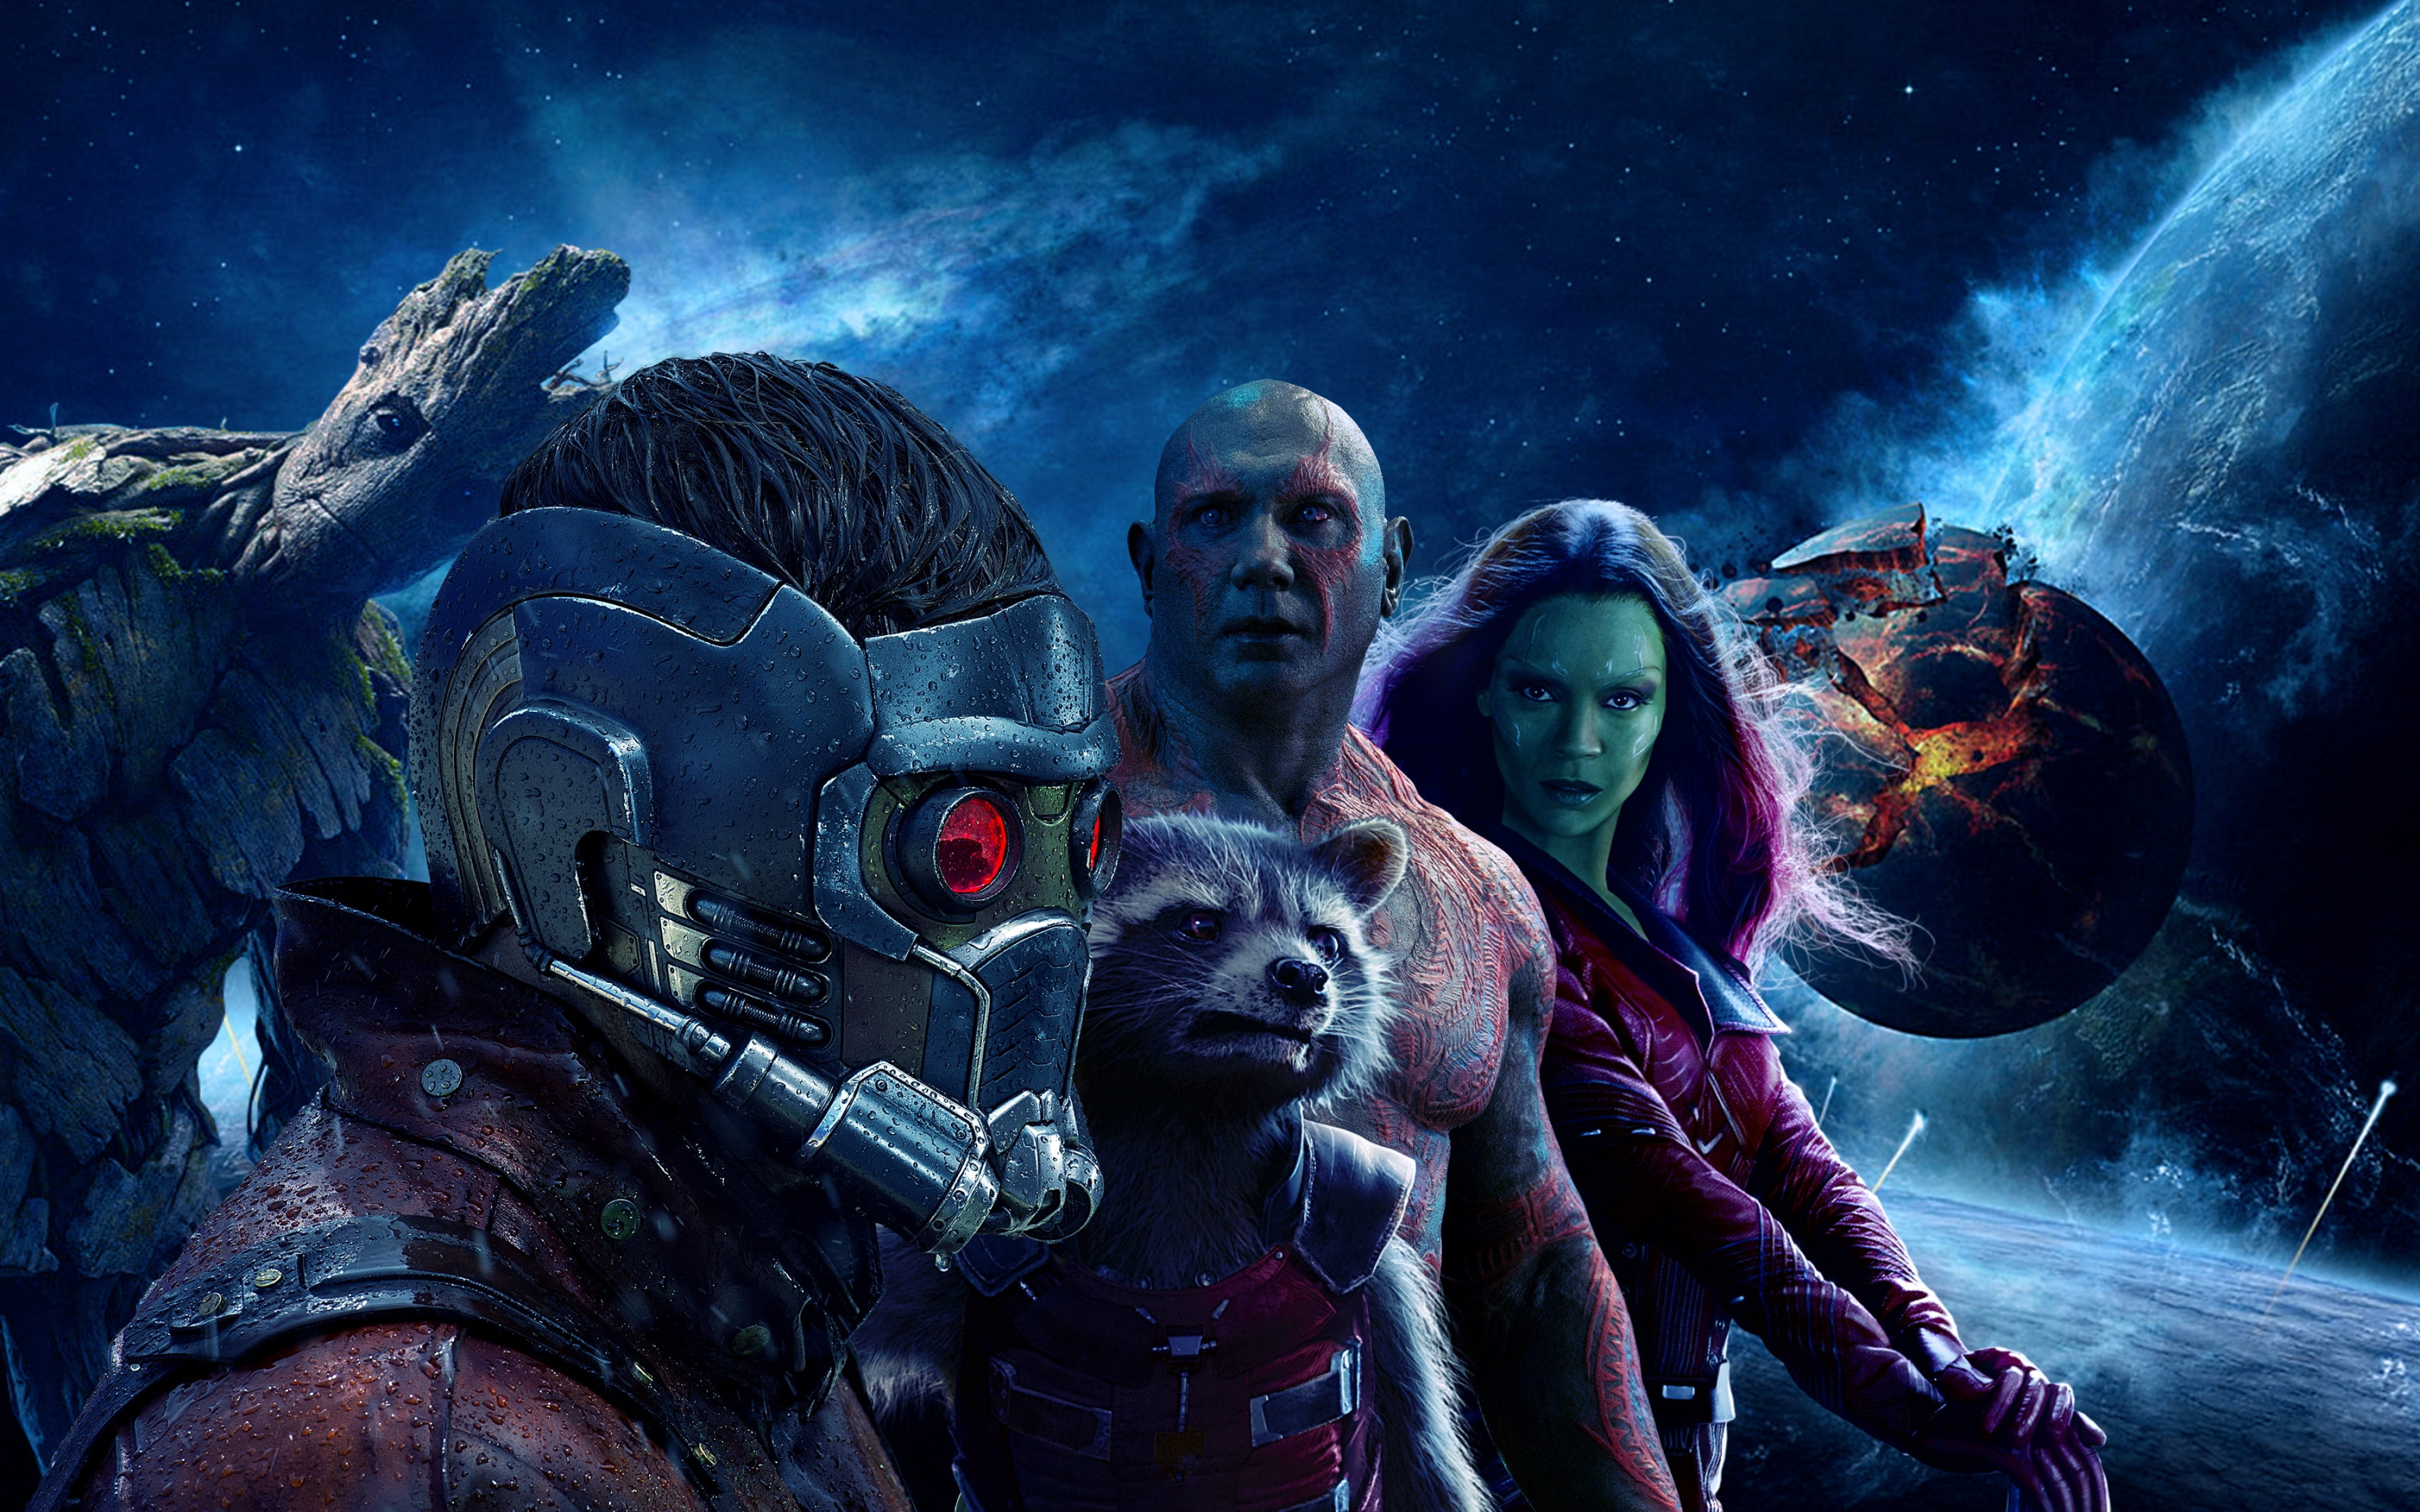 guardians of the galaxy vol 2, peter quill backgrounds, gamora